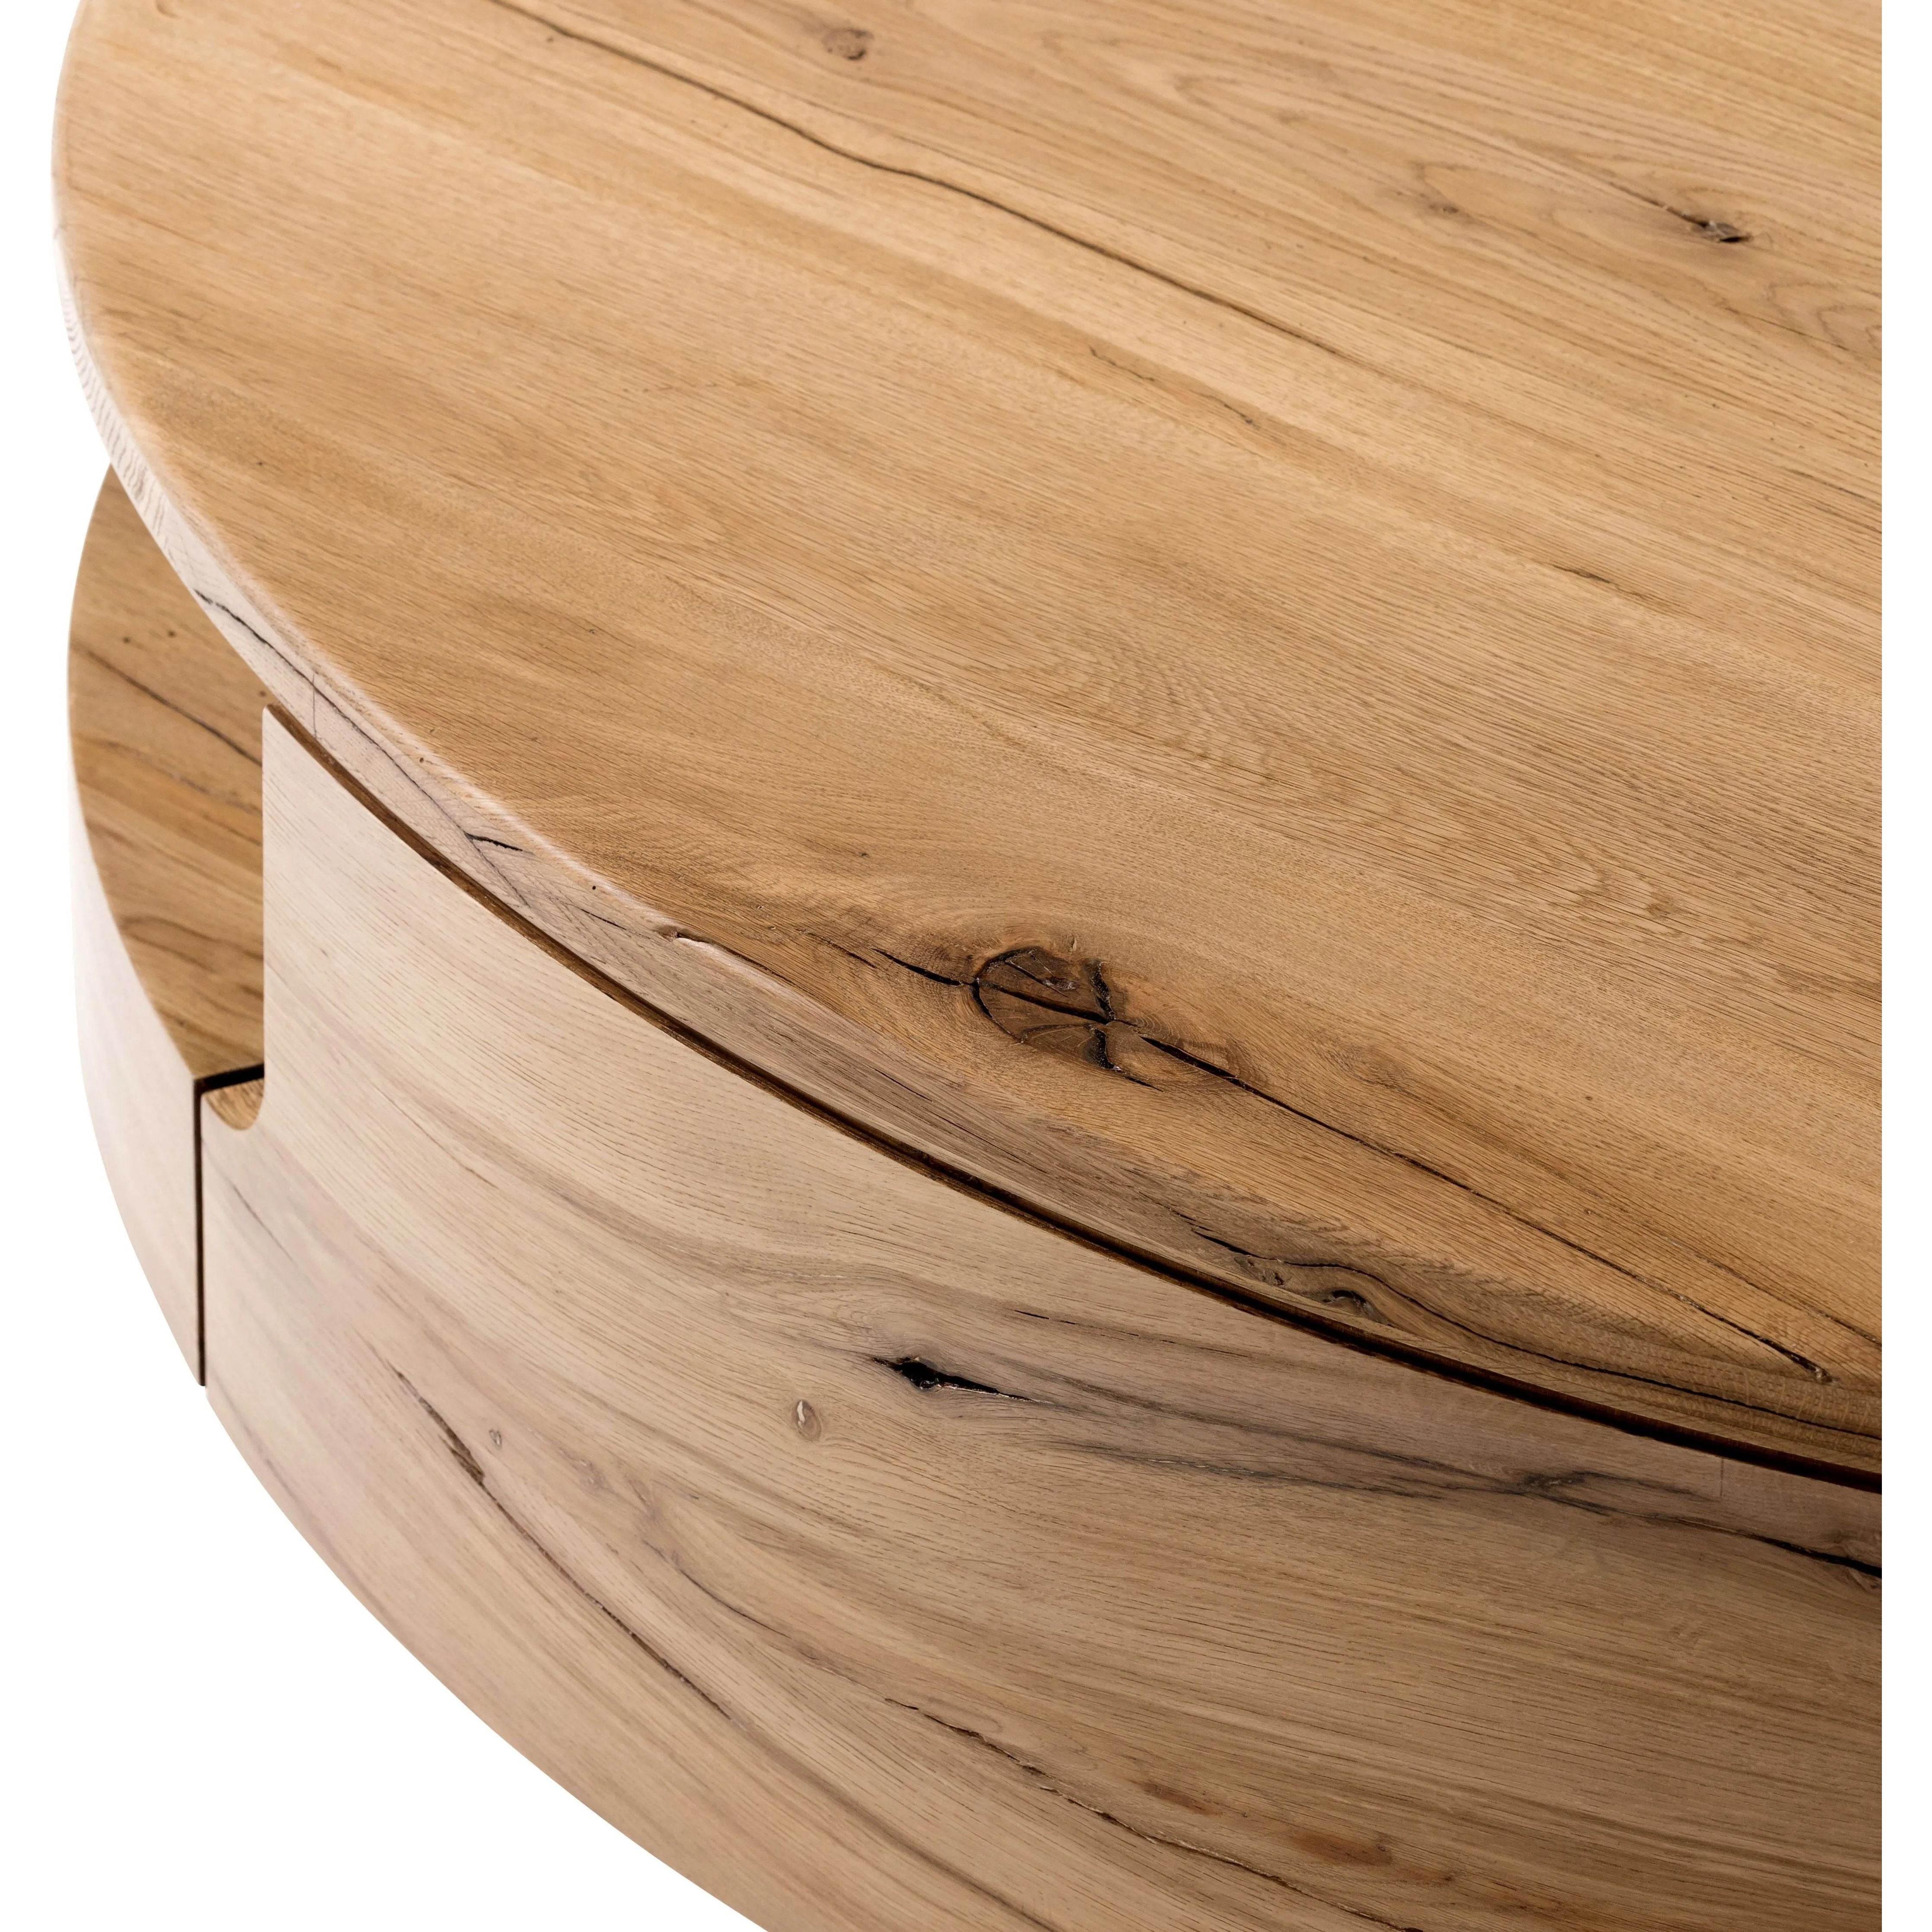 Designed in partnership with longtime Four Hands collaborator Thomas Bina and Brazilian designer Ronald Sasson. A rounded coffee table made from reclaimed French oak, features beautiful natural graining. Lower layer lightens the whole look, while brining the option for bonus storage or display.Collection: Bin Amethyst Home provides interior design, new home construction design consulting, vintage area rugs, and lighting in the Houston metro area.